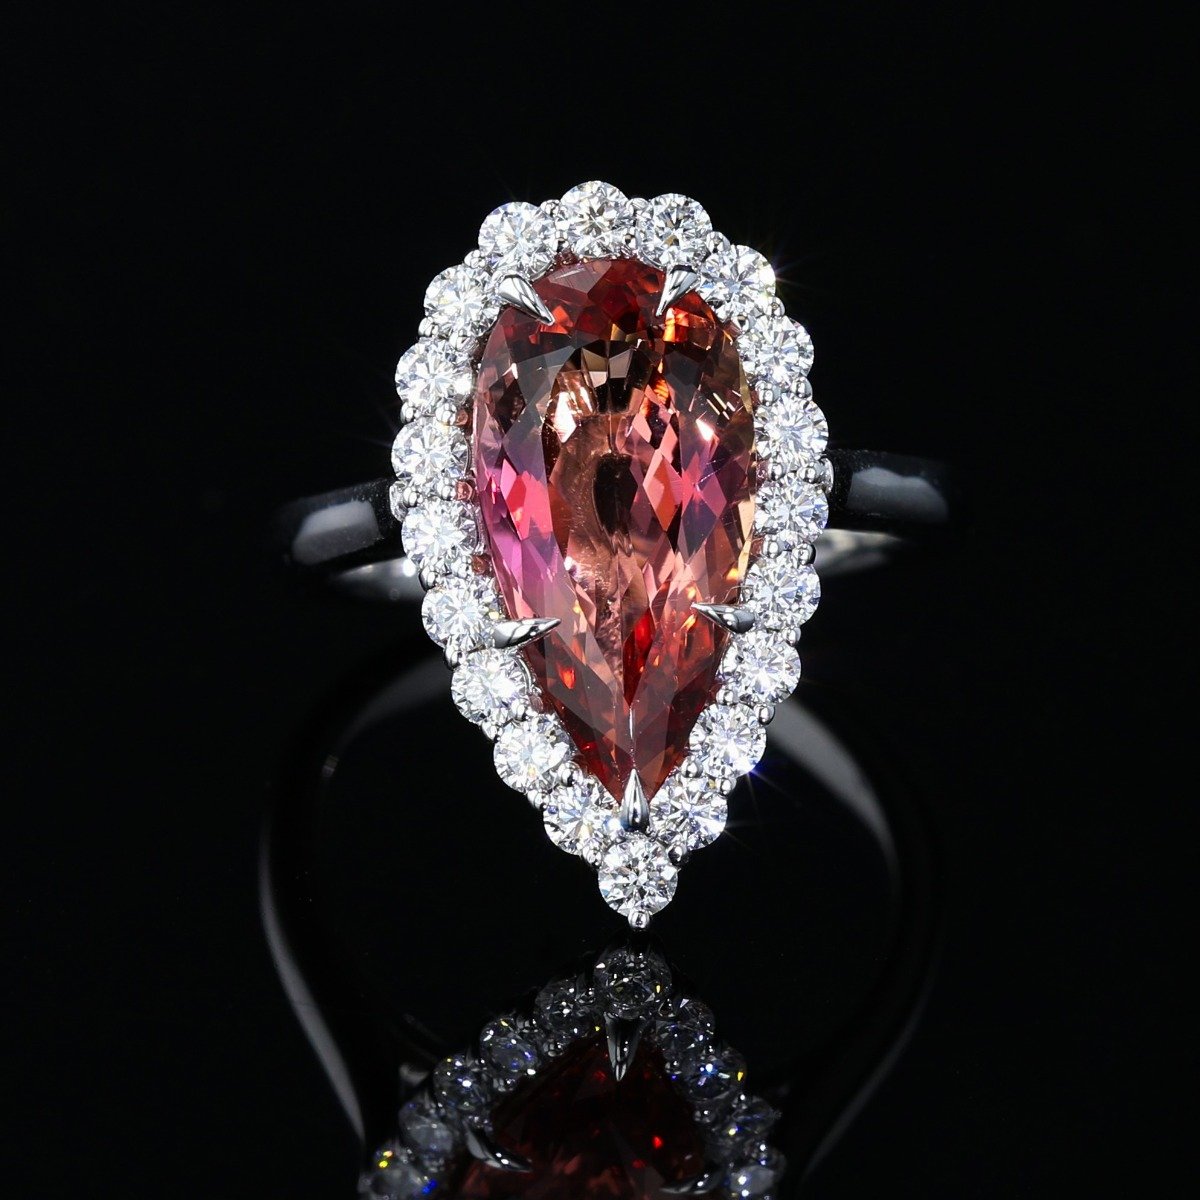 JULEVE 18KT 4.09 CT IMPERIAL TOPAZ & .79 CTW DIAMOND PEAR HALO RING 4,4.5,5,5.5,6,6.5,7,7.5,8,8.5,9